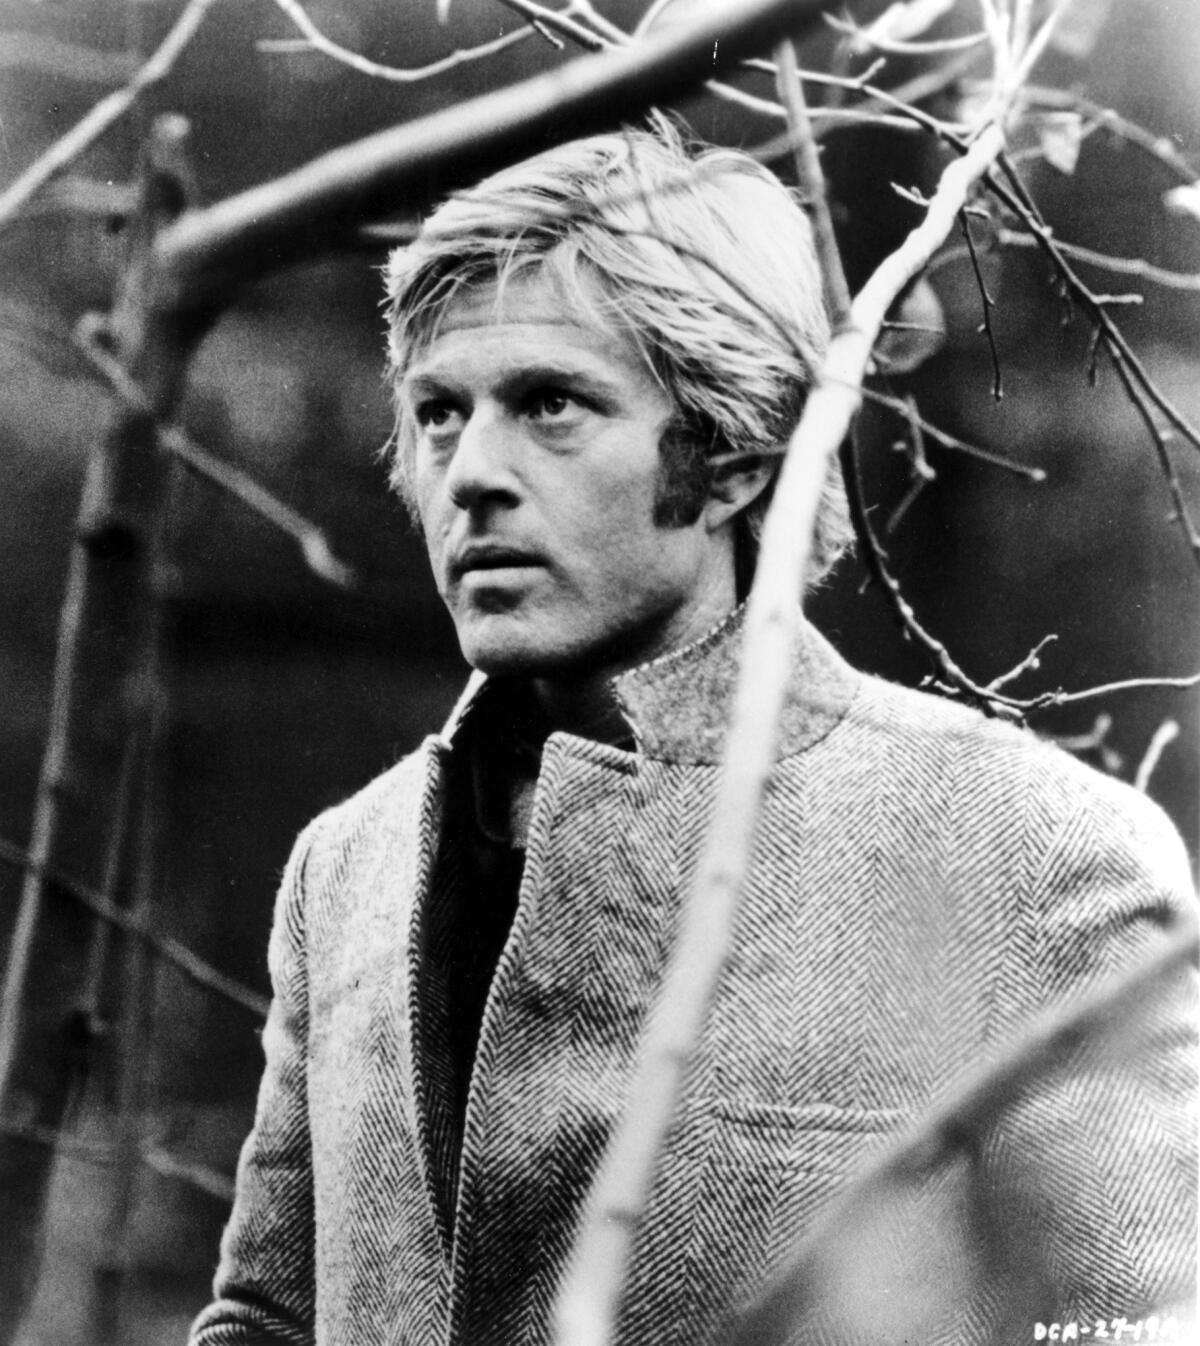 Robert Redford in a scene from "Three Days of the Condor."